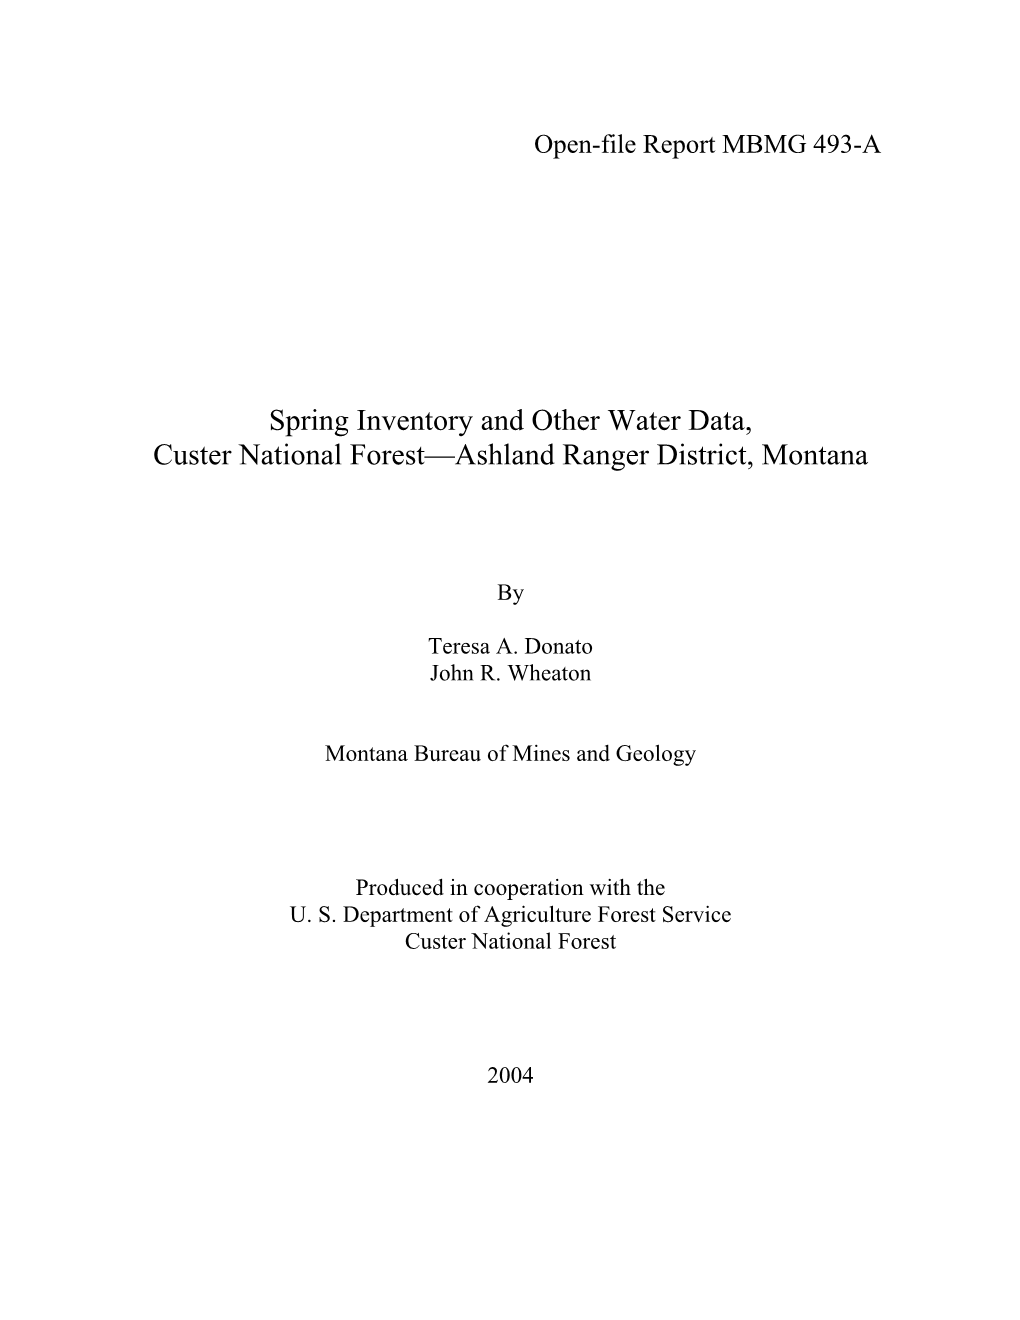 Spring Inventory and Other Water Data, Custer National Forest—Ashland Ranger District, Montana